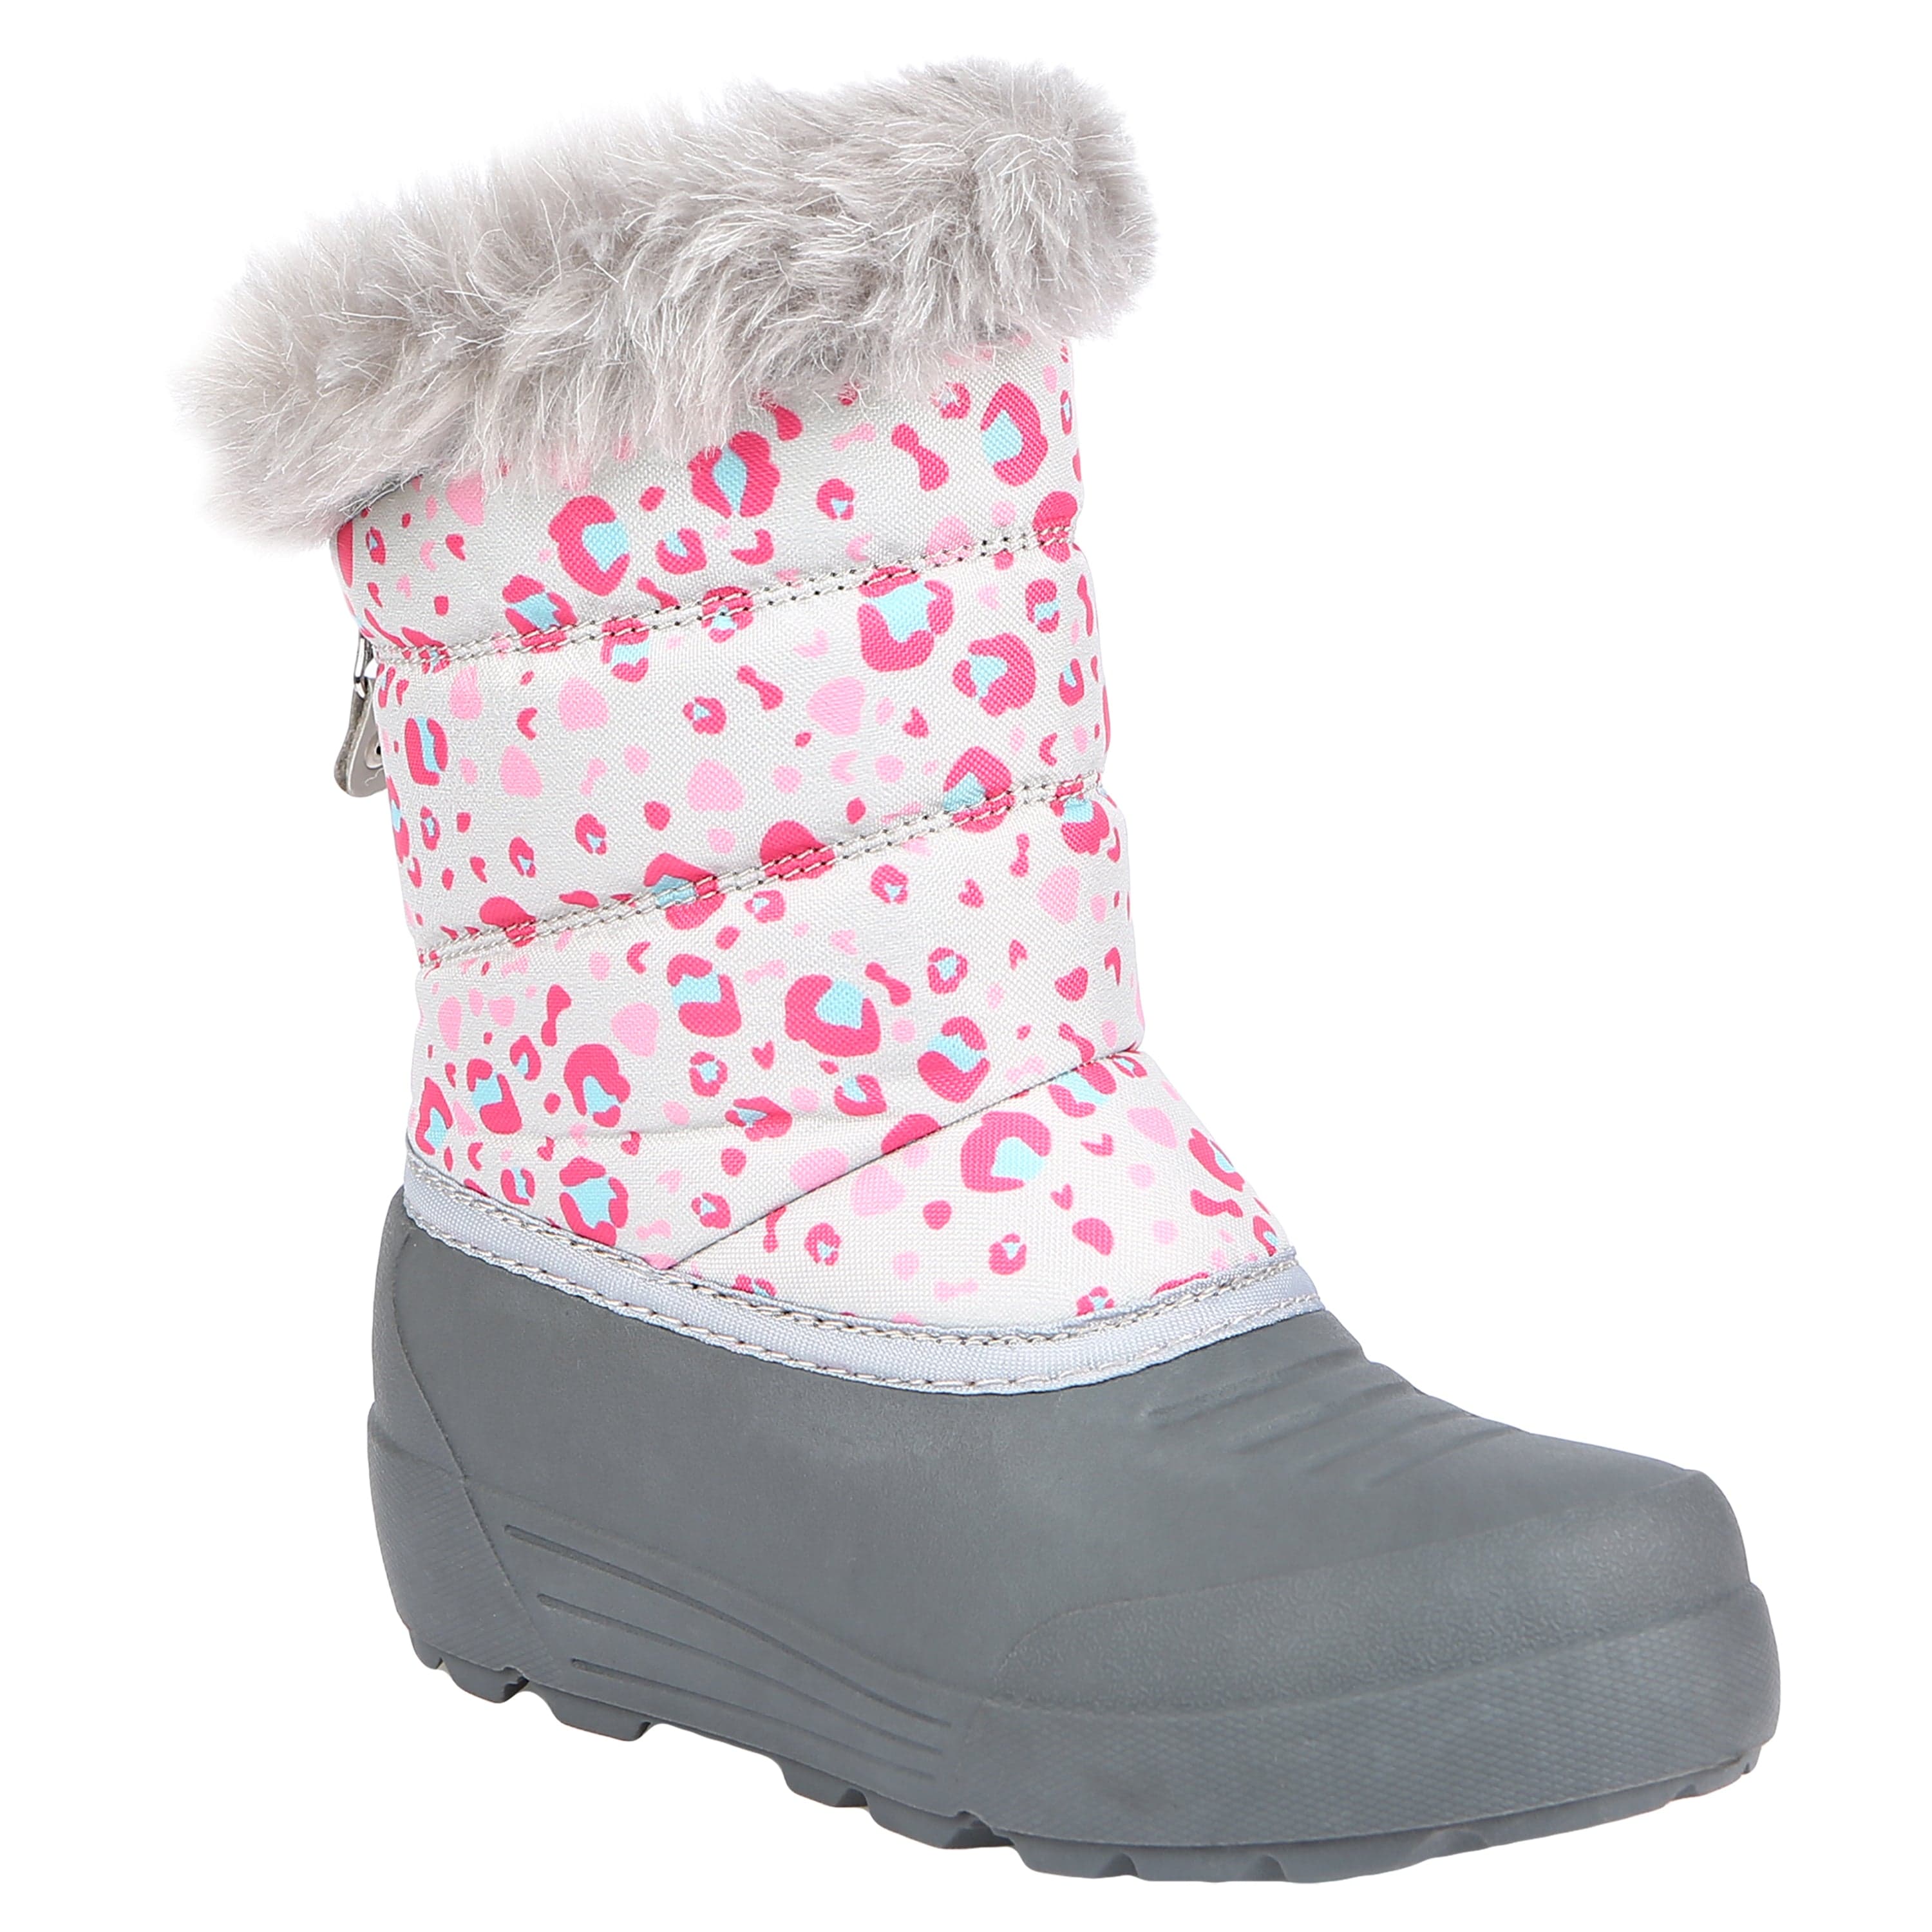 Kid's Ava Cold Weather Snow Boot - Northside USA